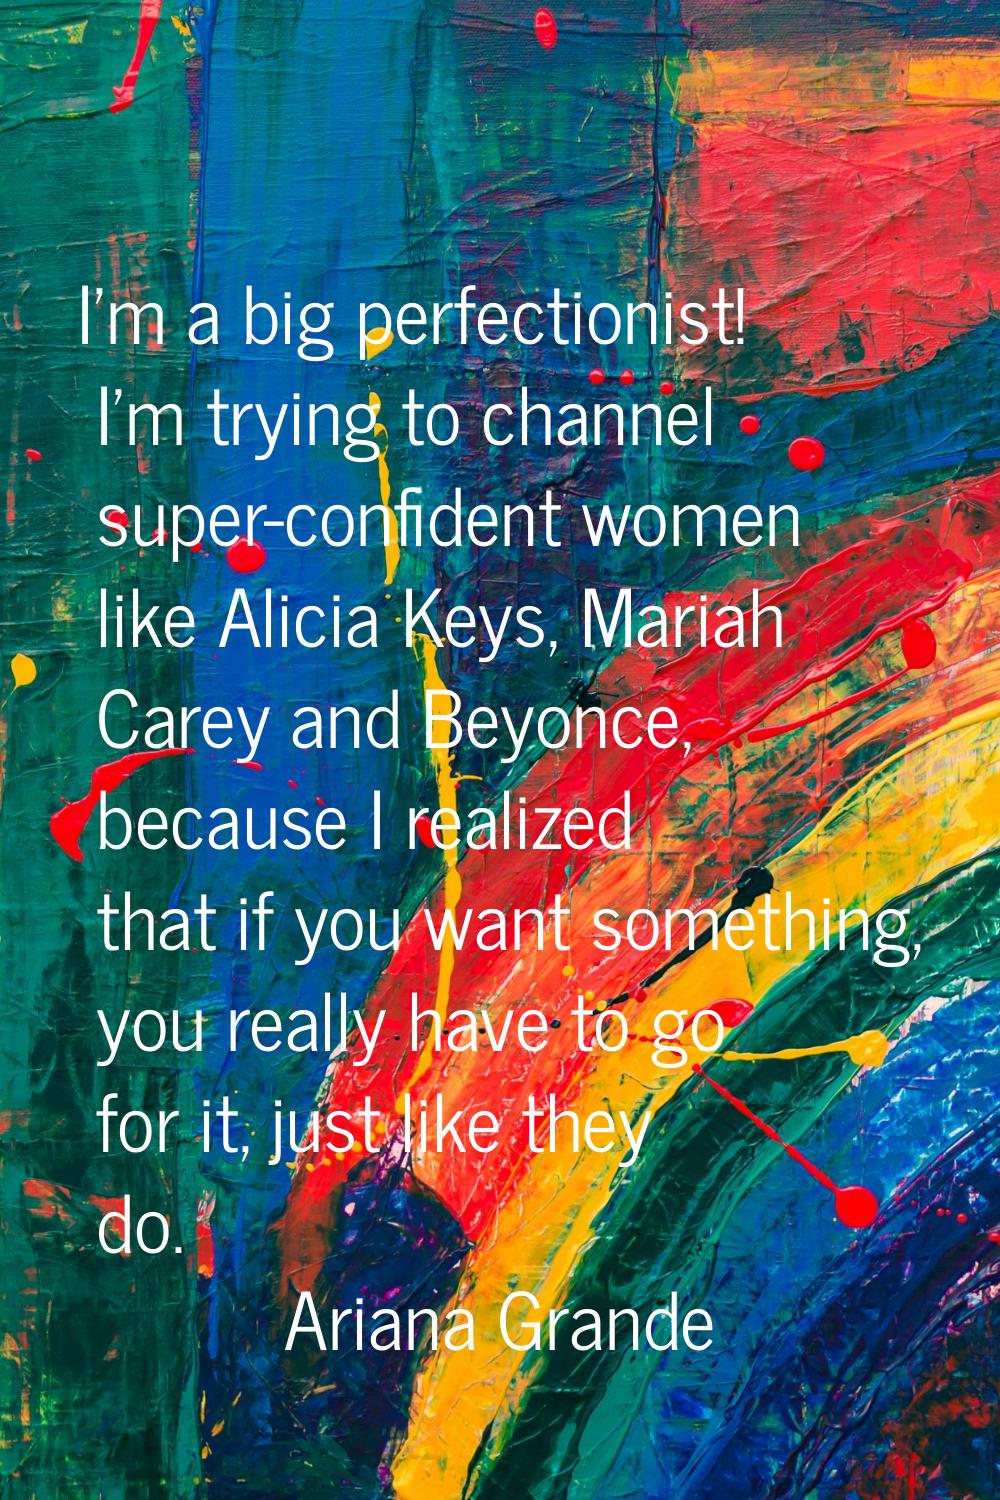 I'm a big perfectionist! I'm trying to channel super-confident women like Alicia Keys, Mariah Carey